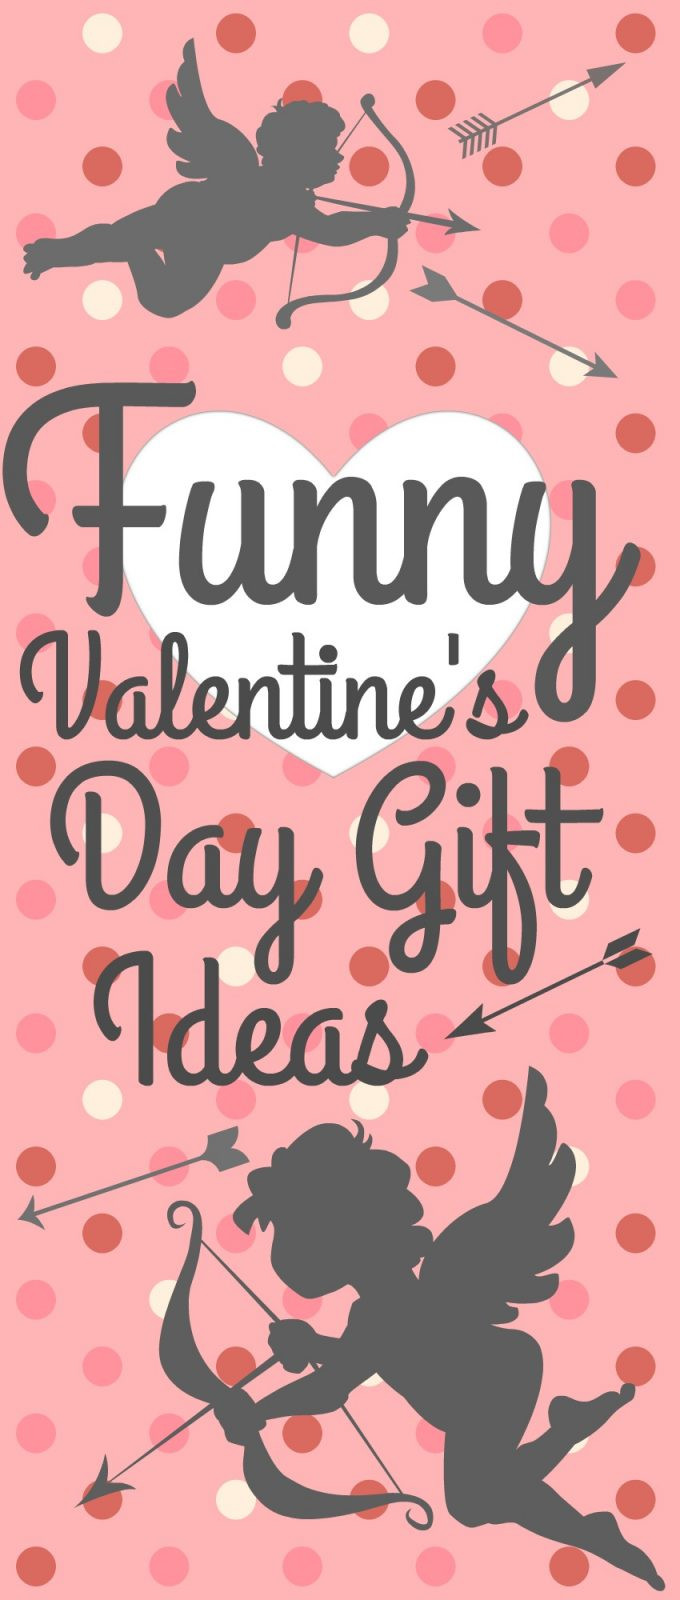 Funny Valentines Gift Ideas
 Funny Valentine s Day Gifts